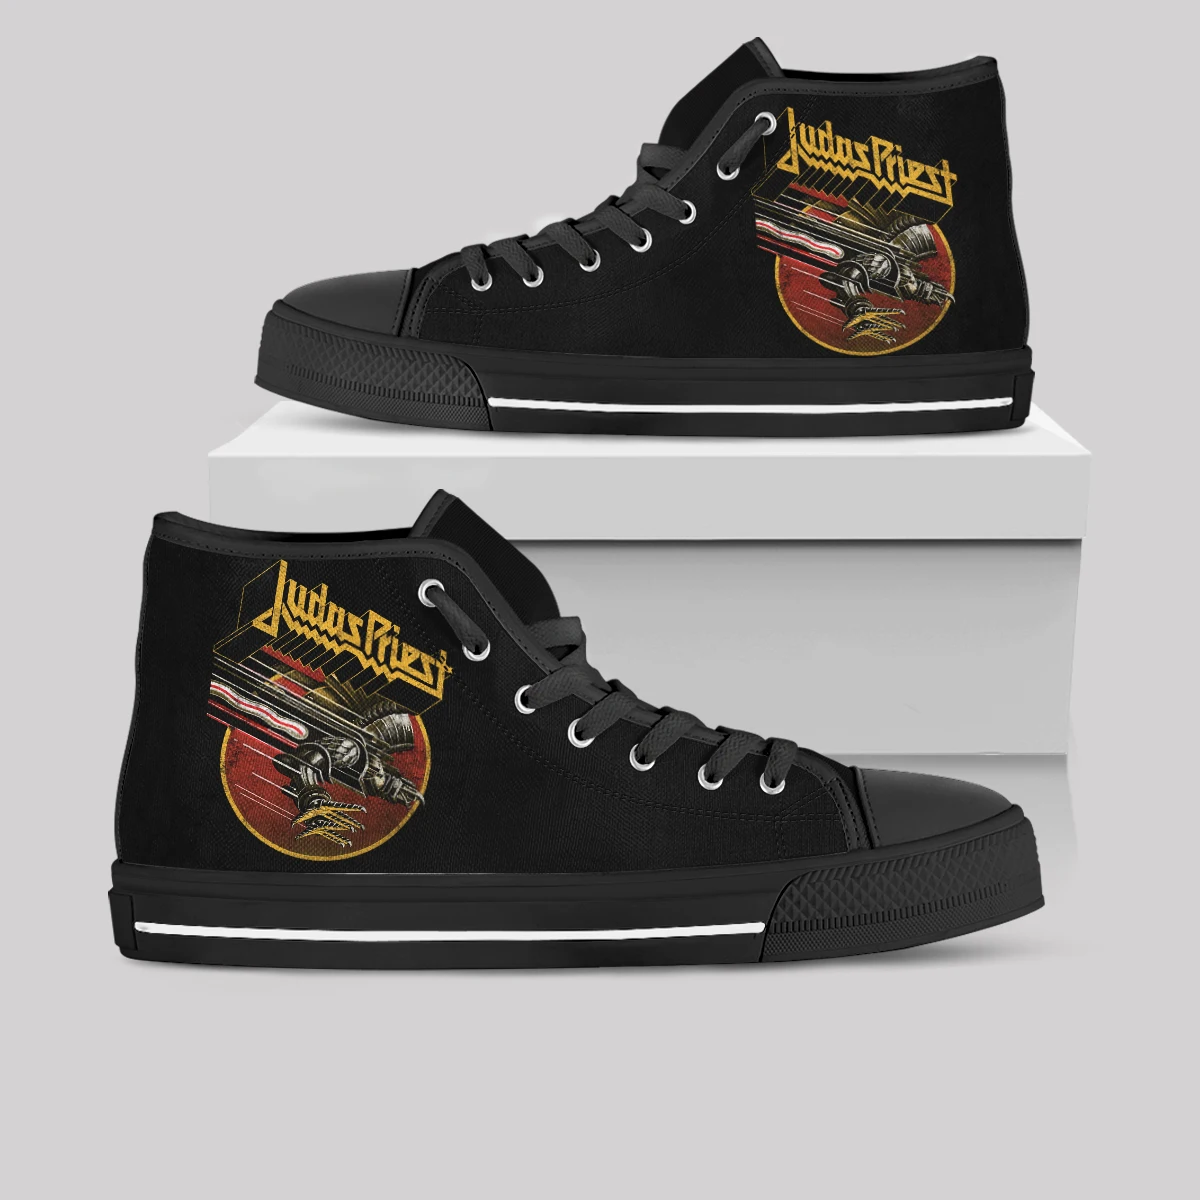 

Hot Summer Judas Priest Fans Arrive Fashion Lightweight High Top Canvas Shoes Men Women Fashion Casual Shoes Breathable Sneakers